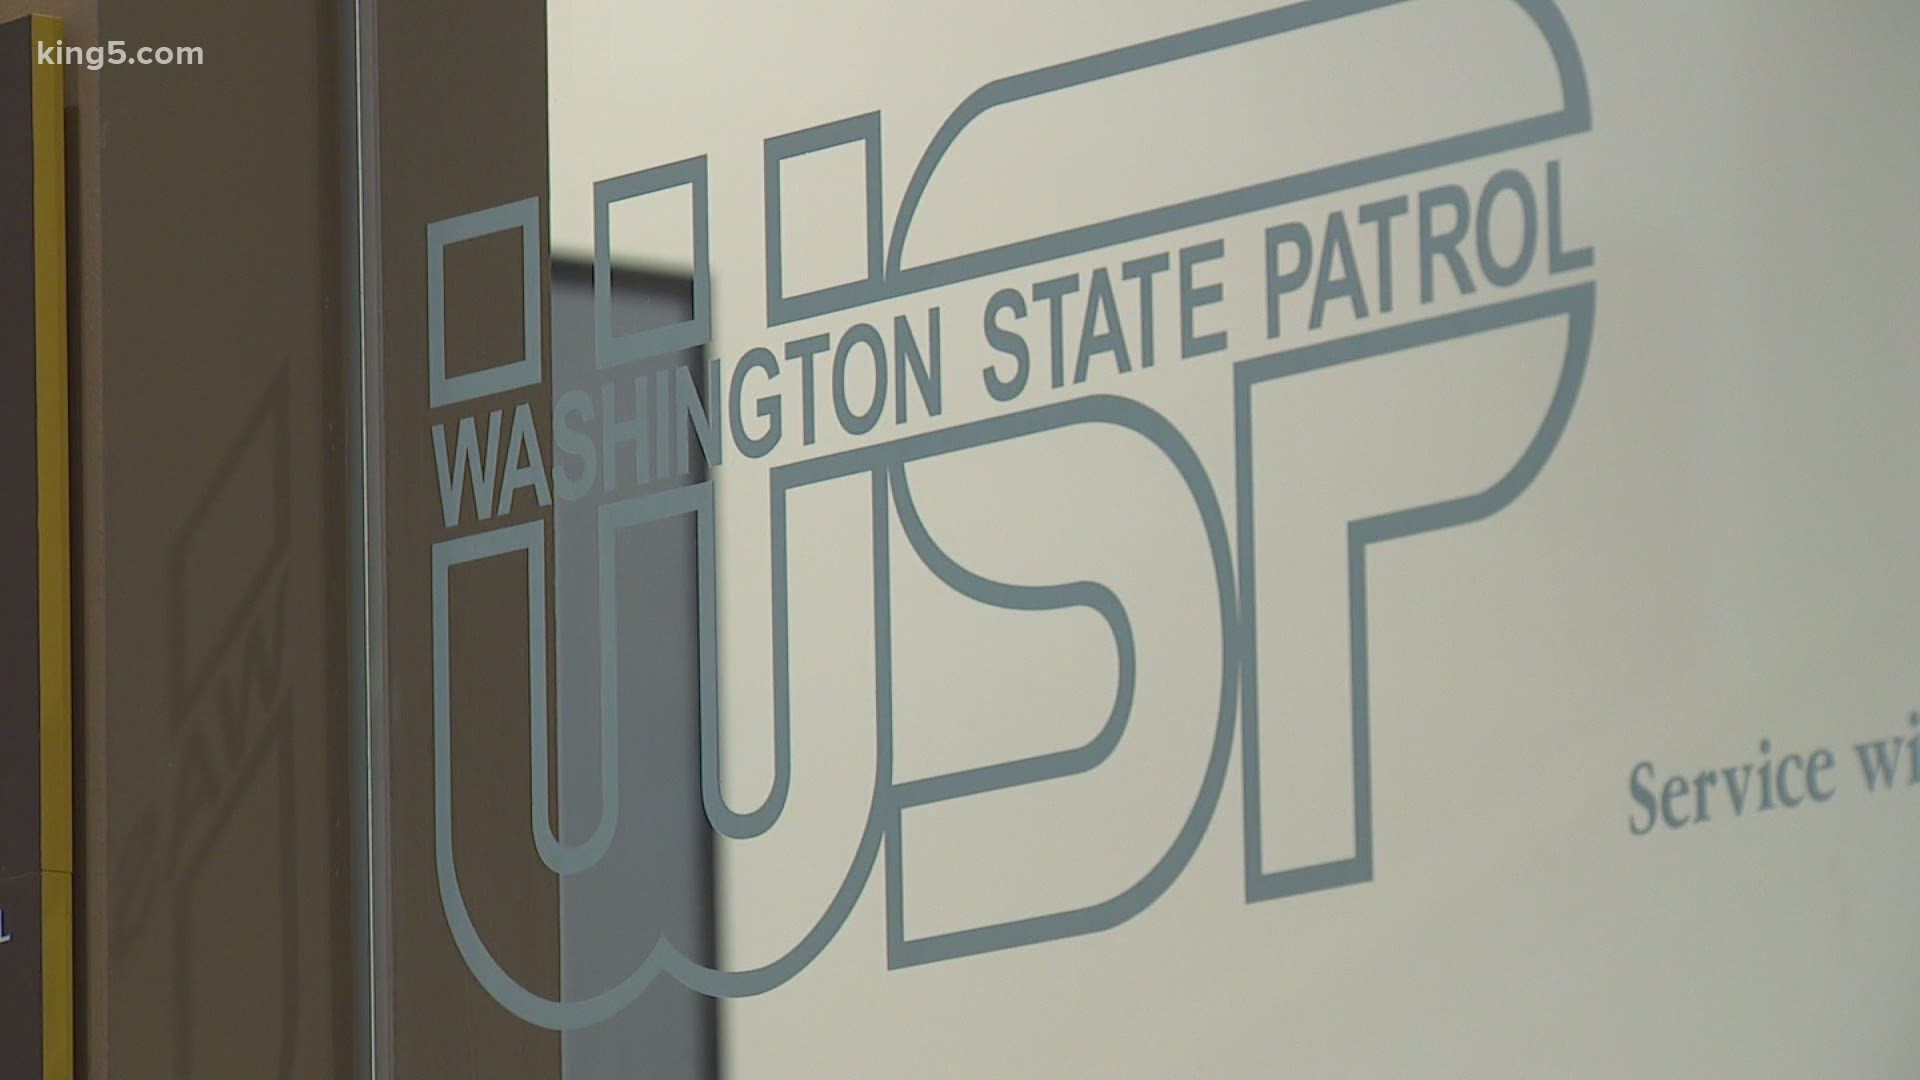 Officials with Washington State Patrol say the man admitted to something during his interview that got the attention of investigators.